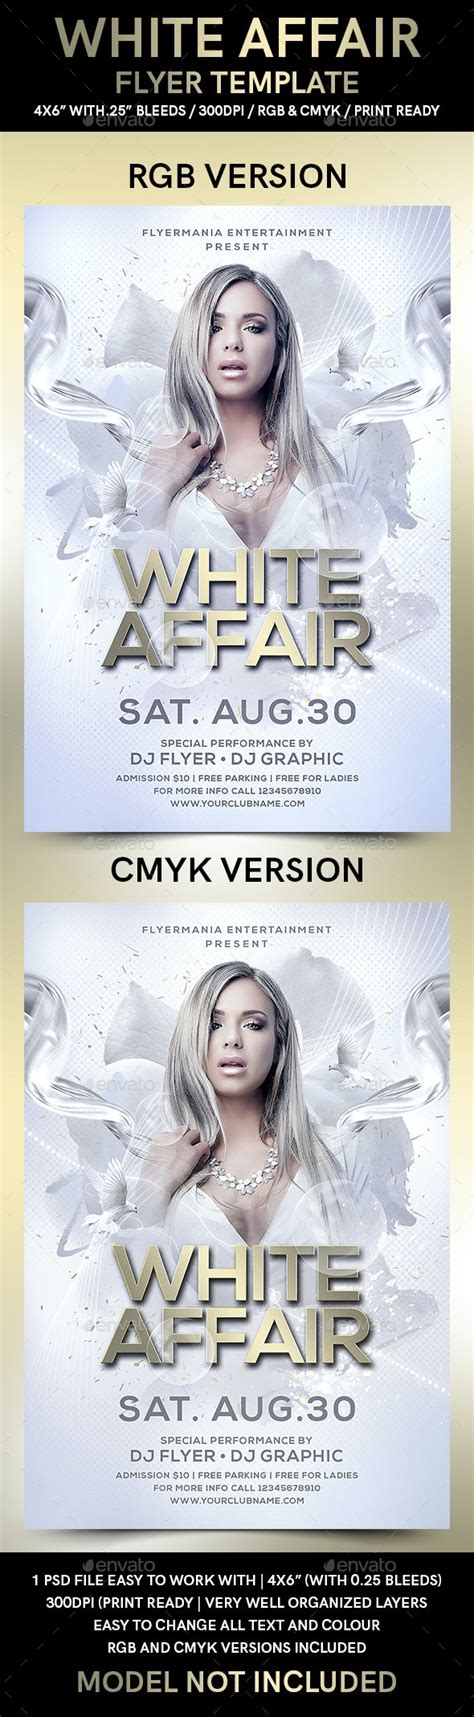 White Affair Flyer Template By Flyermania Graphicriver